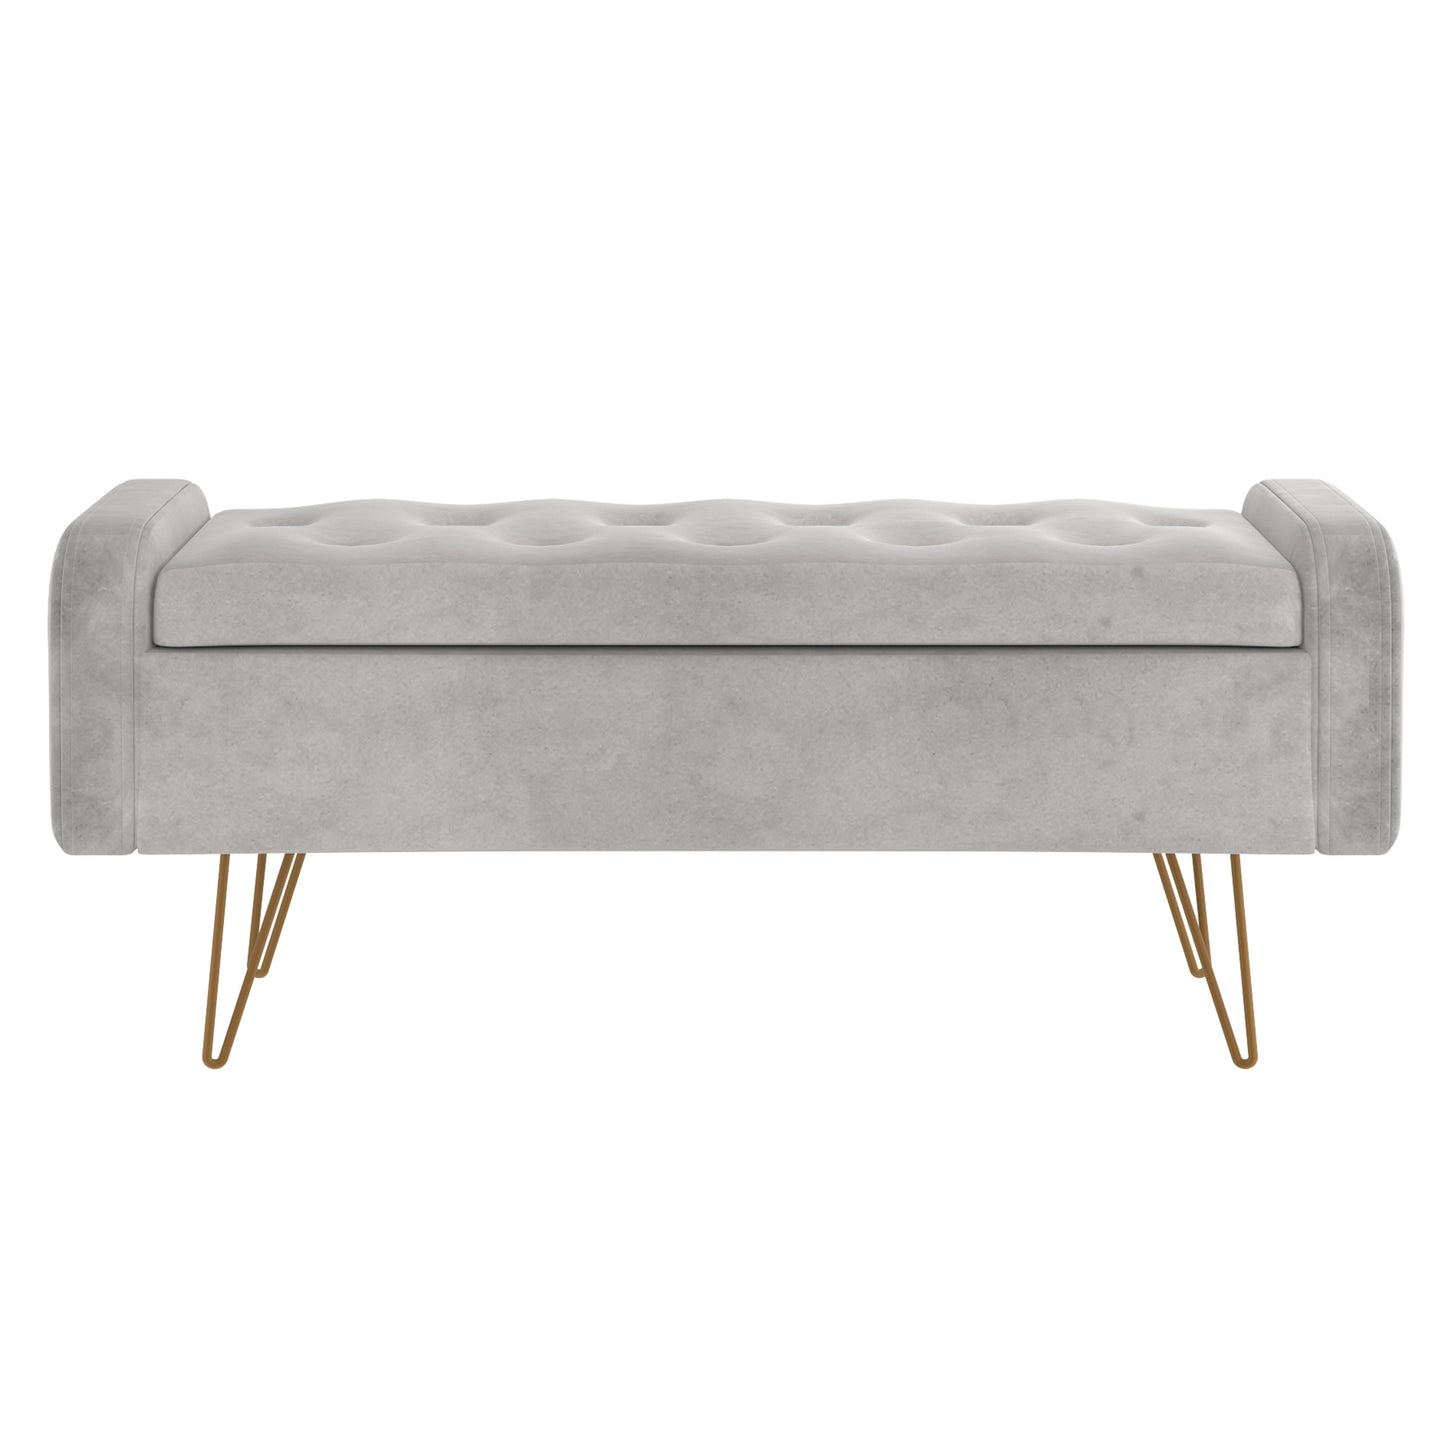 Sabel Storage Ottoman/Bench in Grey and Aged Gold